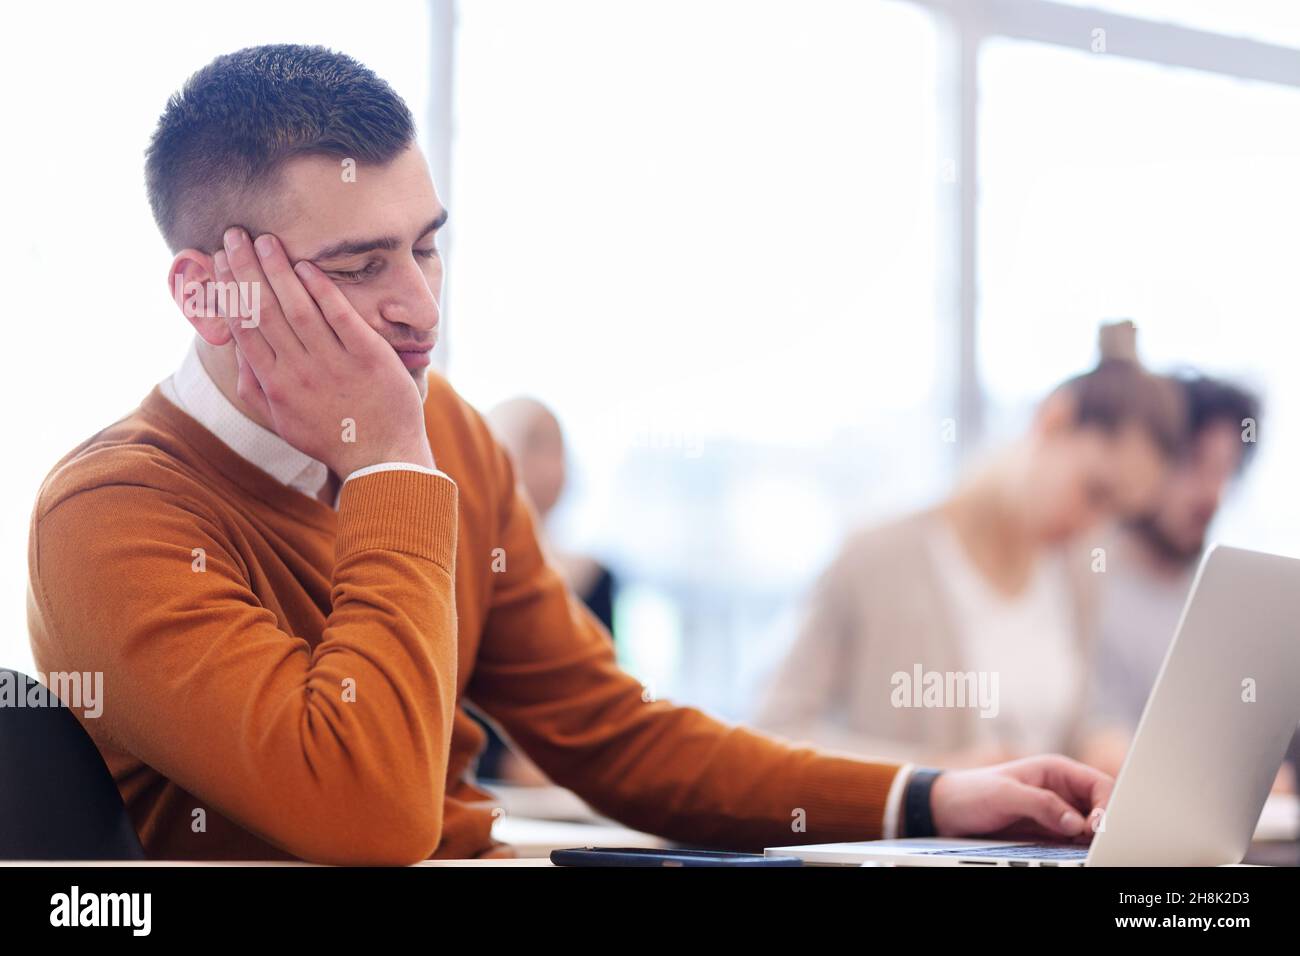 Students listening to a lecturer in a classroom. Young man sleeping during boring class. Stock Photo